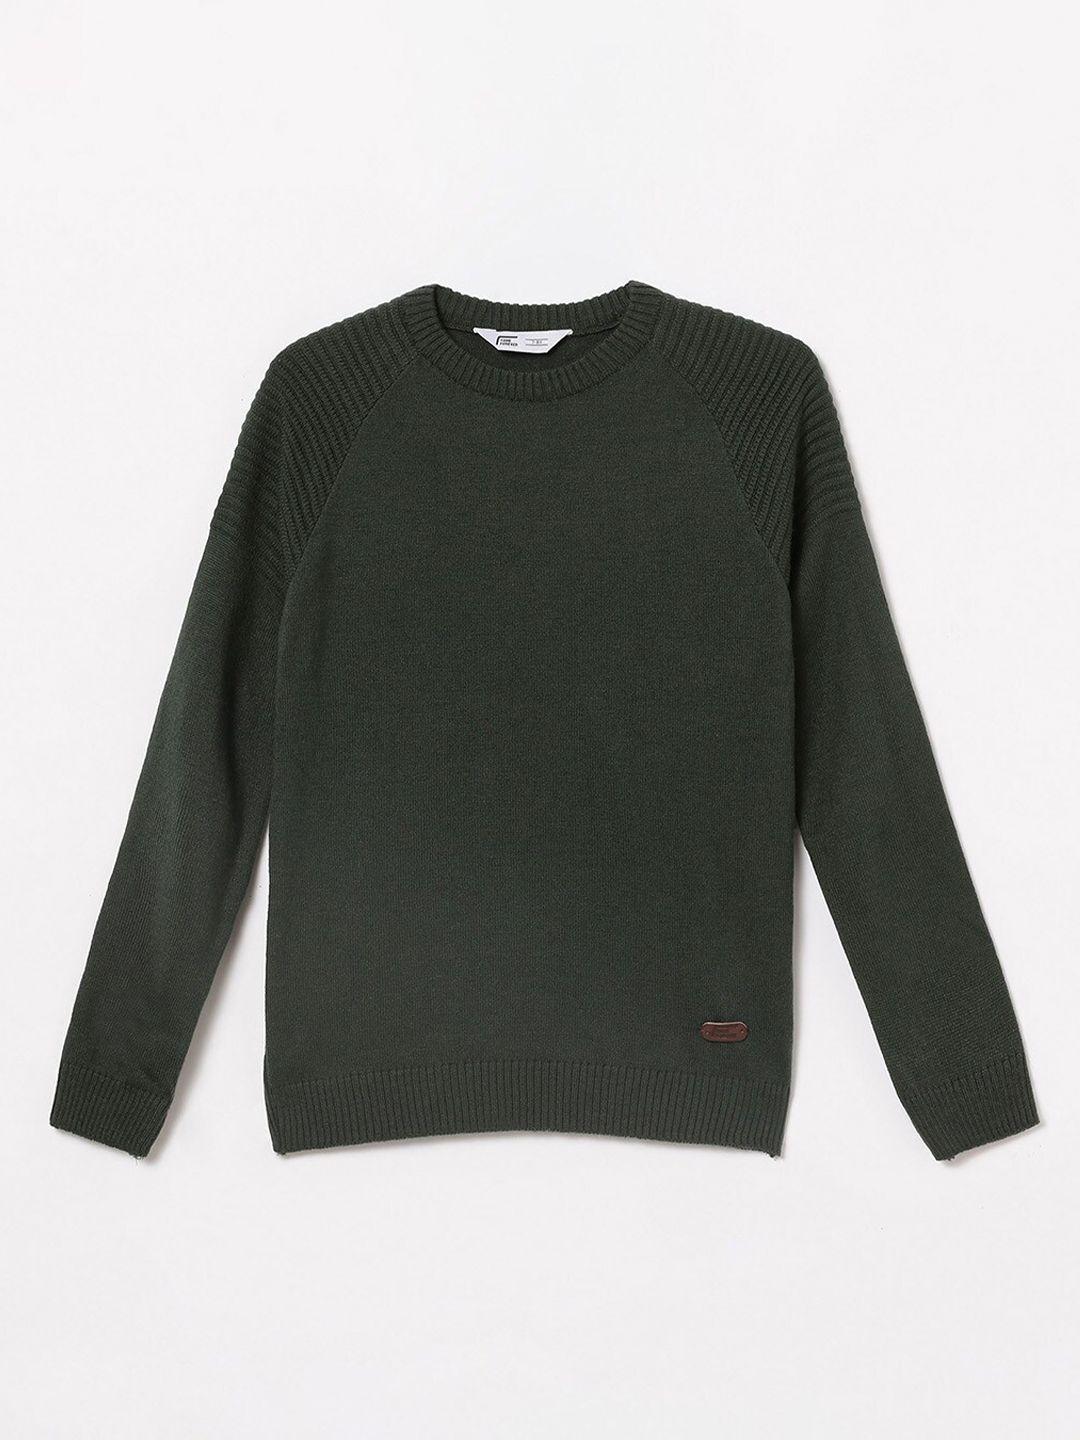 fame forever by lifestyle boys olive green acrylic sweater